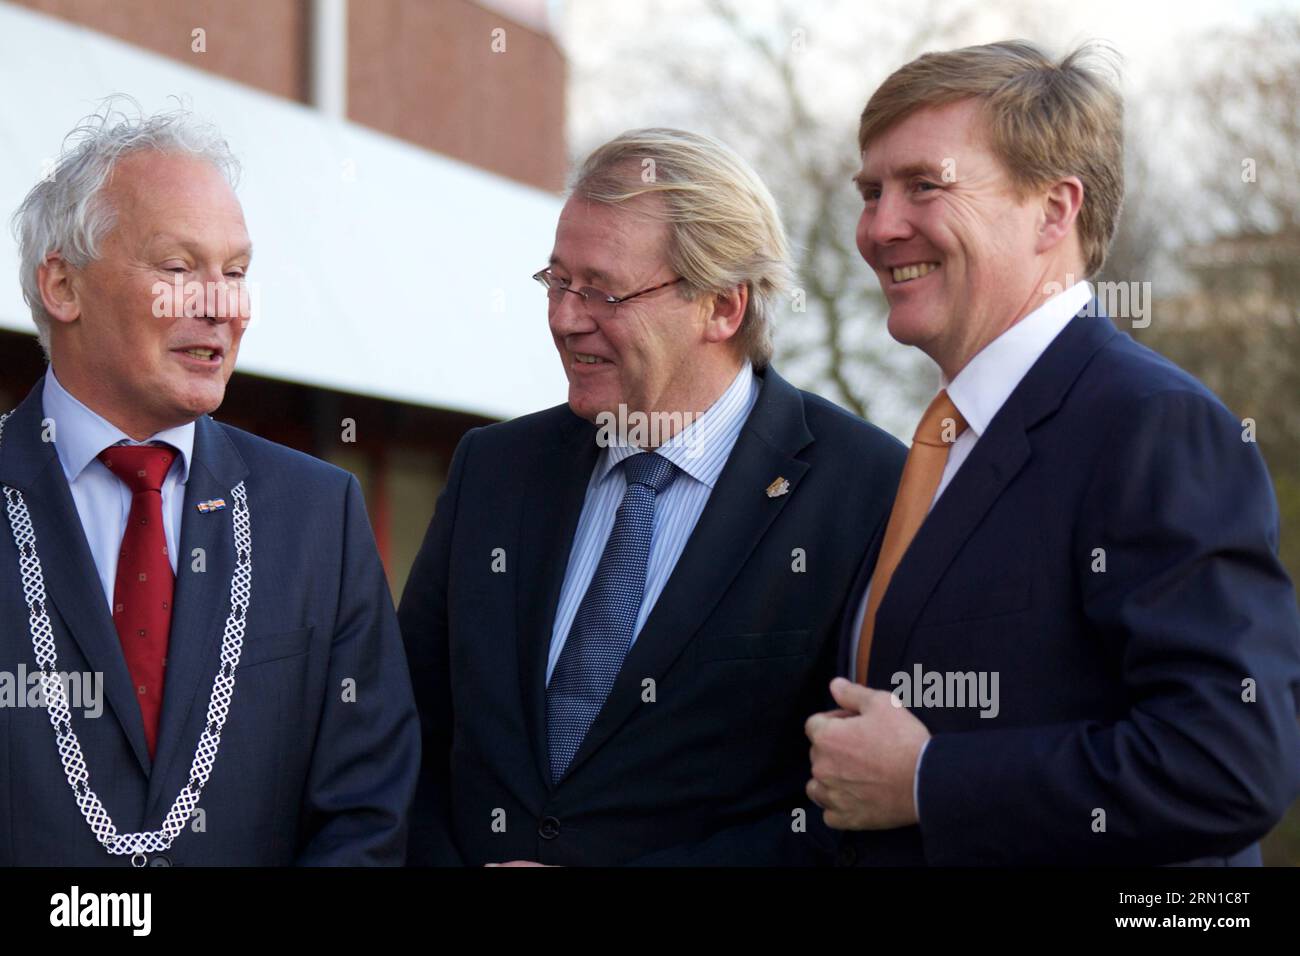 (141216) -- NOORDWIJK, Dec. 16, 2014 -- Dutch King Willem-Alexander(R) attends the celebration of 50 years in space of the European Space Agency, organized by ESA s science and technology center based in Noordwijk, Netherlands, on Dec. 16, 2014. ) NETHERLANDS-NOORDWIJK-ESA-CELEBRATION SylviaxLederer PUBLICATIONxNOTxINxCHN   Noordwijk DEC 16 2014 Dutch King Willem Alexander r Attends The Celebration of 50 Years in Space of The European Space Agency Organized by ESA S Science and Technology Center Based in Noordwijk Netherlands ON DEC 16 2014 Netherlands Noordwijk ESA Celebration  PUBLICATIONxNO Stock Photo